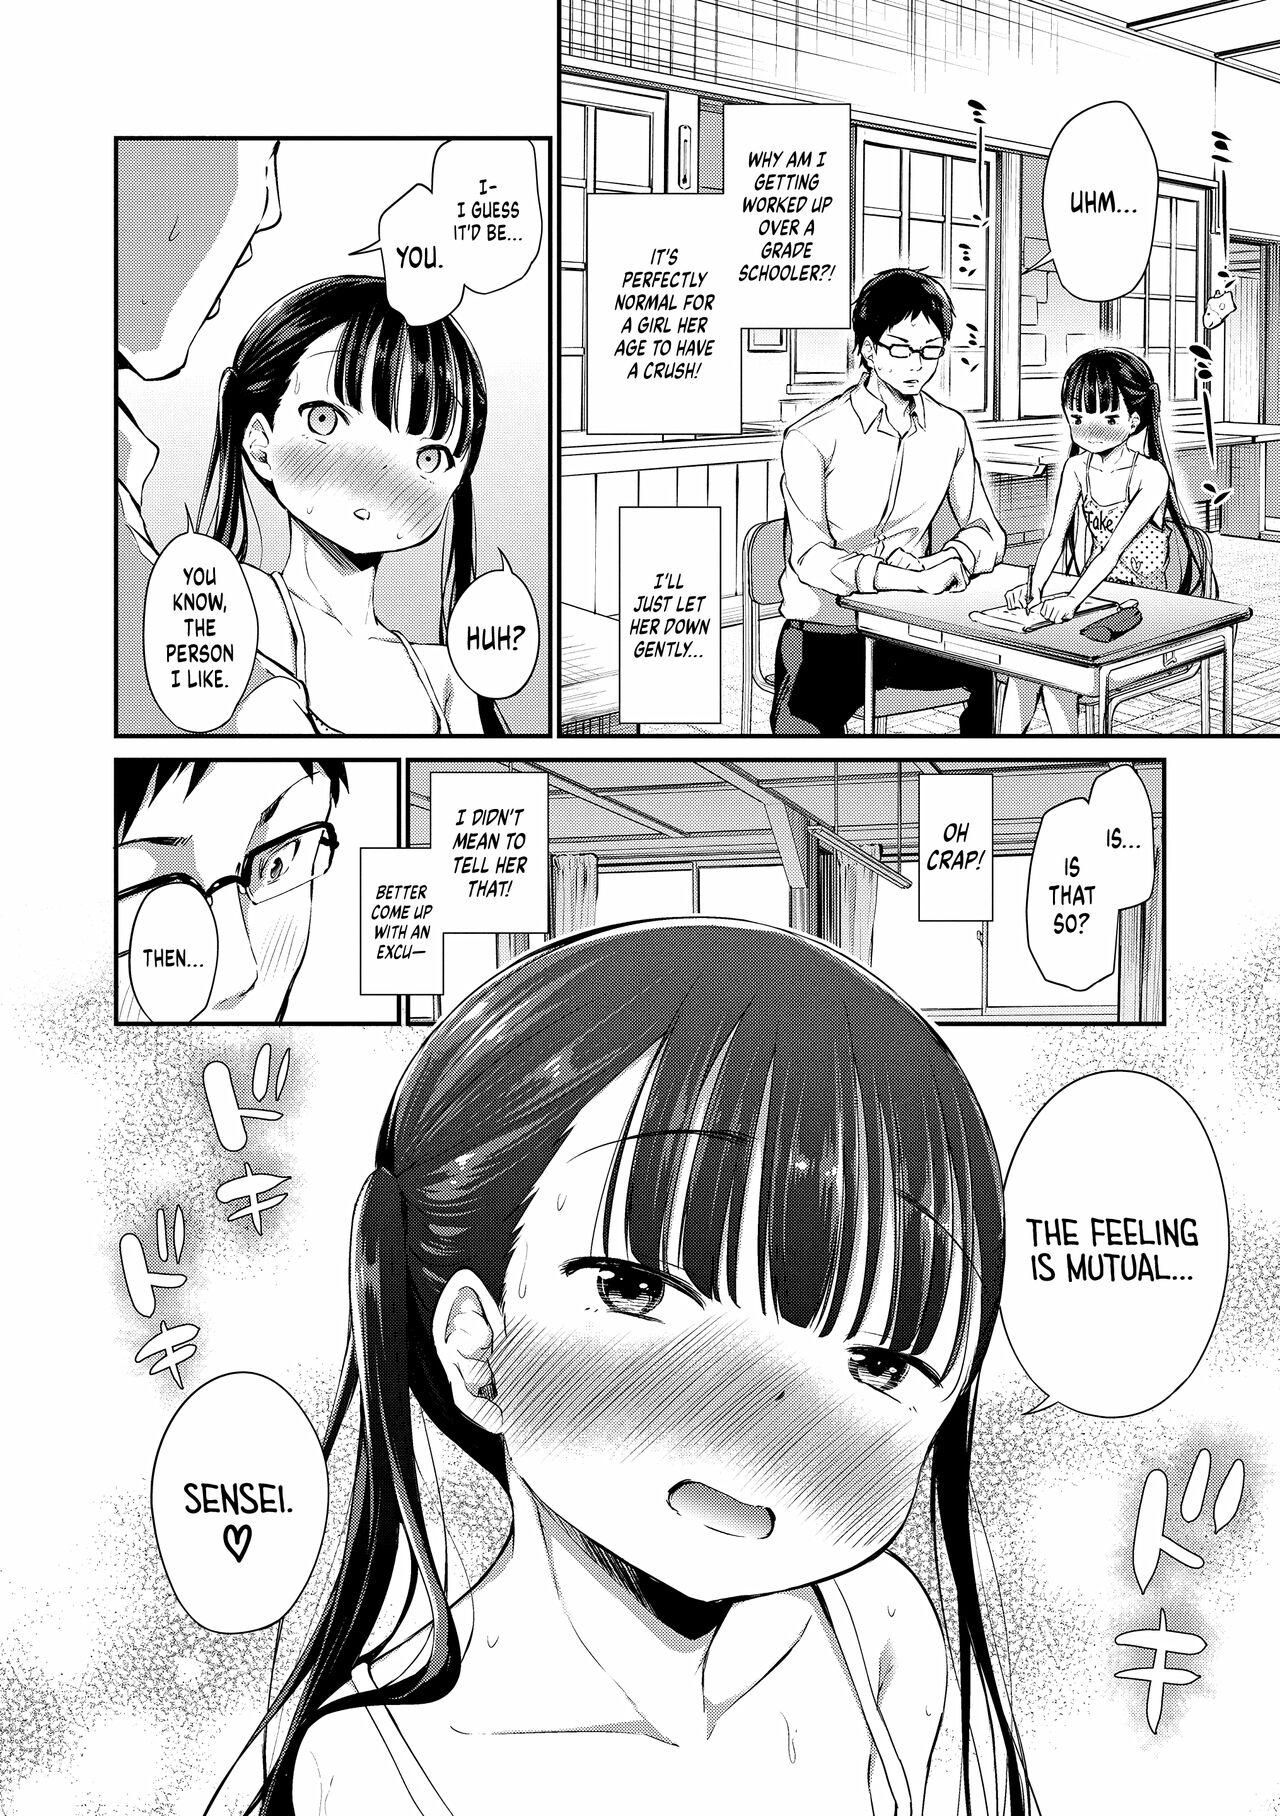 Oriental Futari no Kyoushitsu | Our Classroom Pussy Sex - Page 4